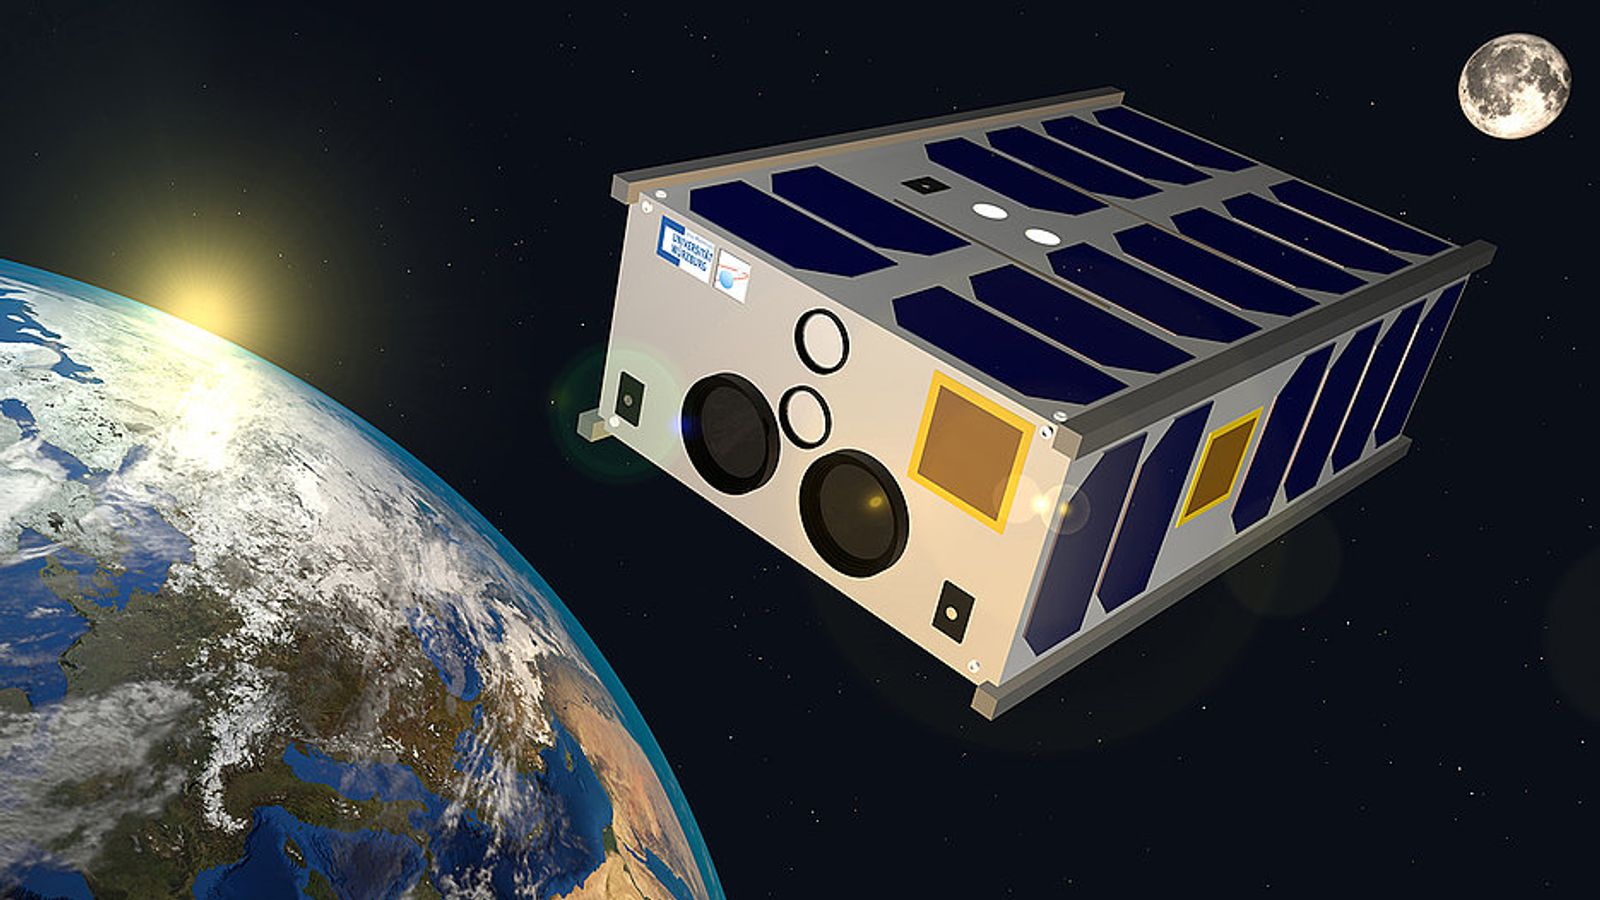 The nanosatellite from the University of Würzburg aims to test artificial intelligence technology in space